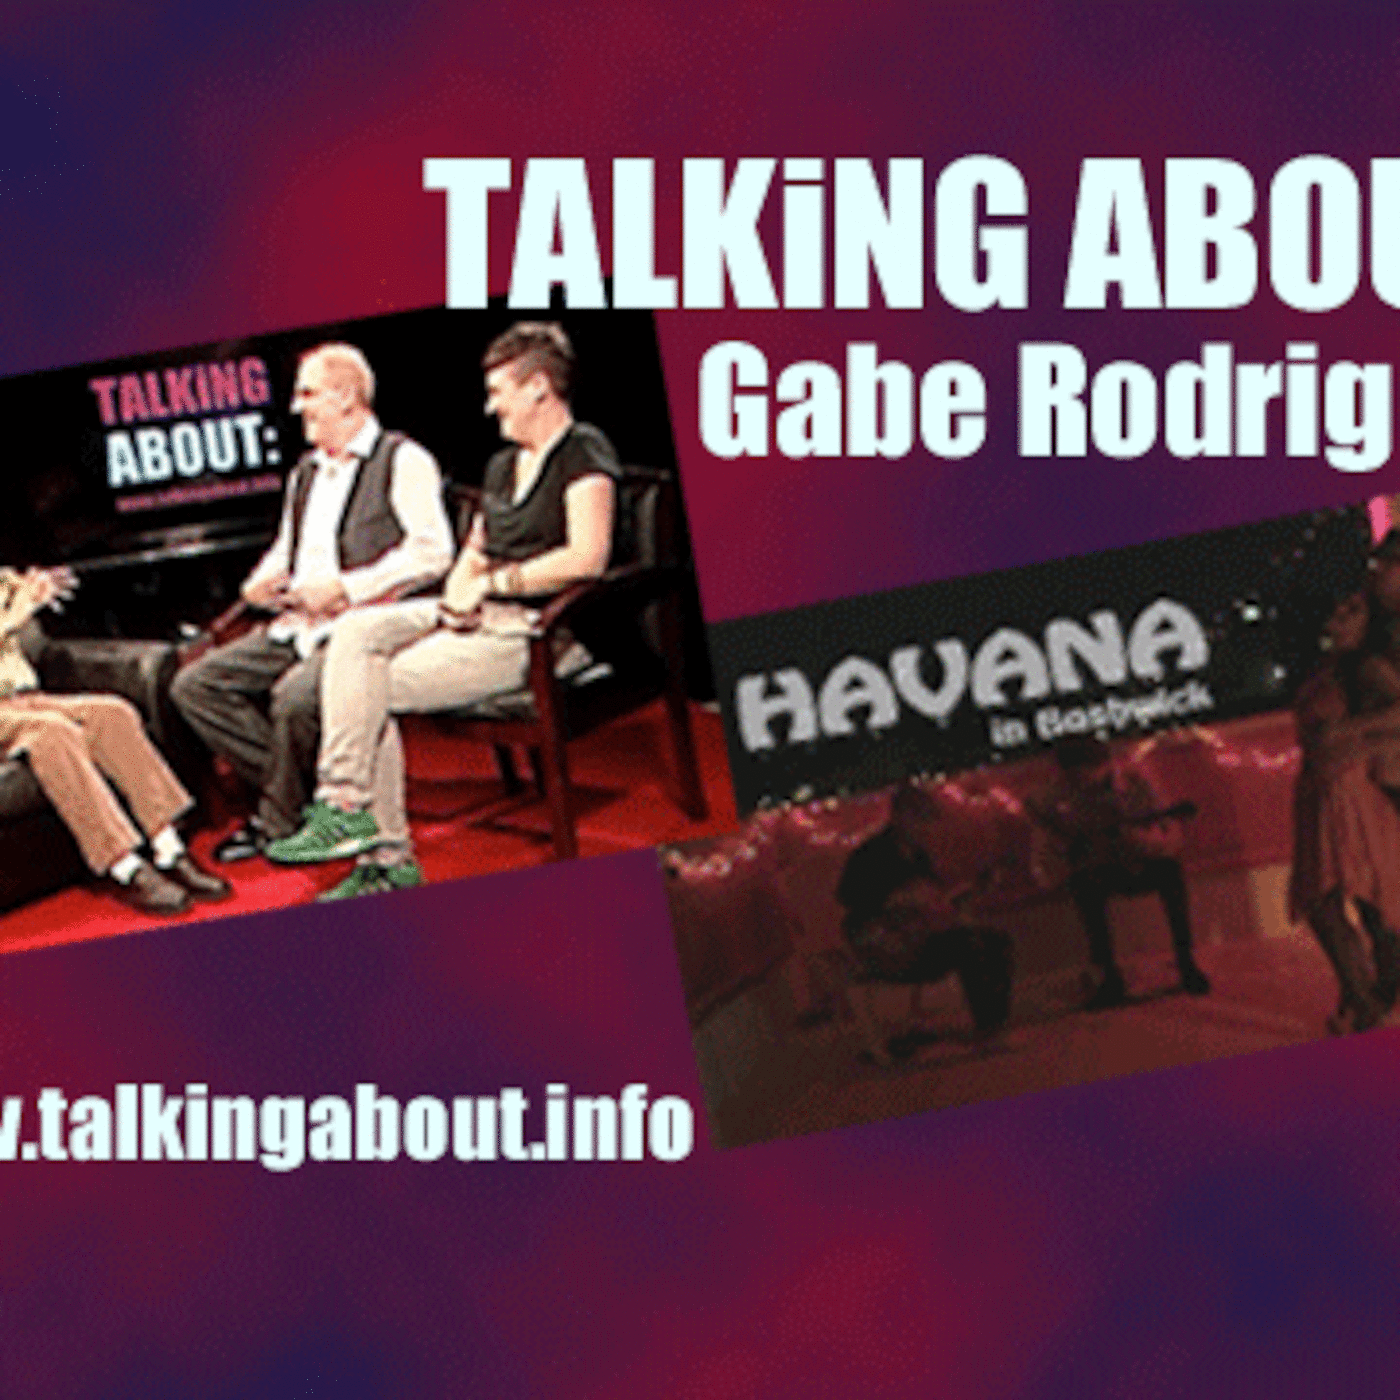 Talking About: Gabe Rodriguez